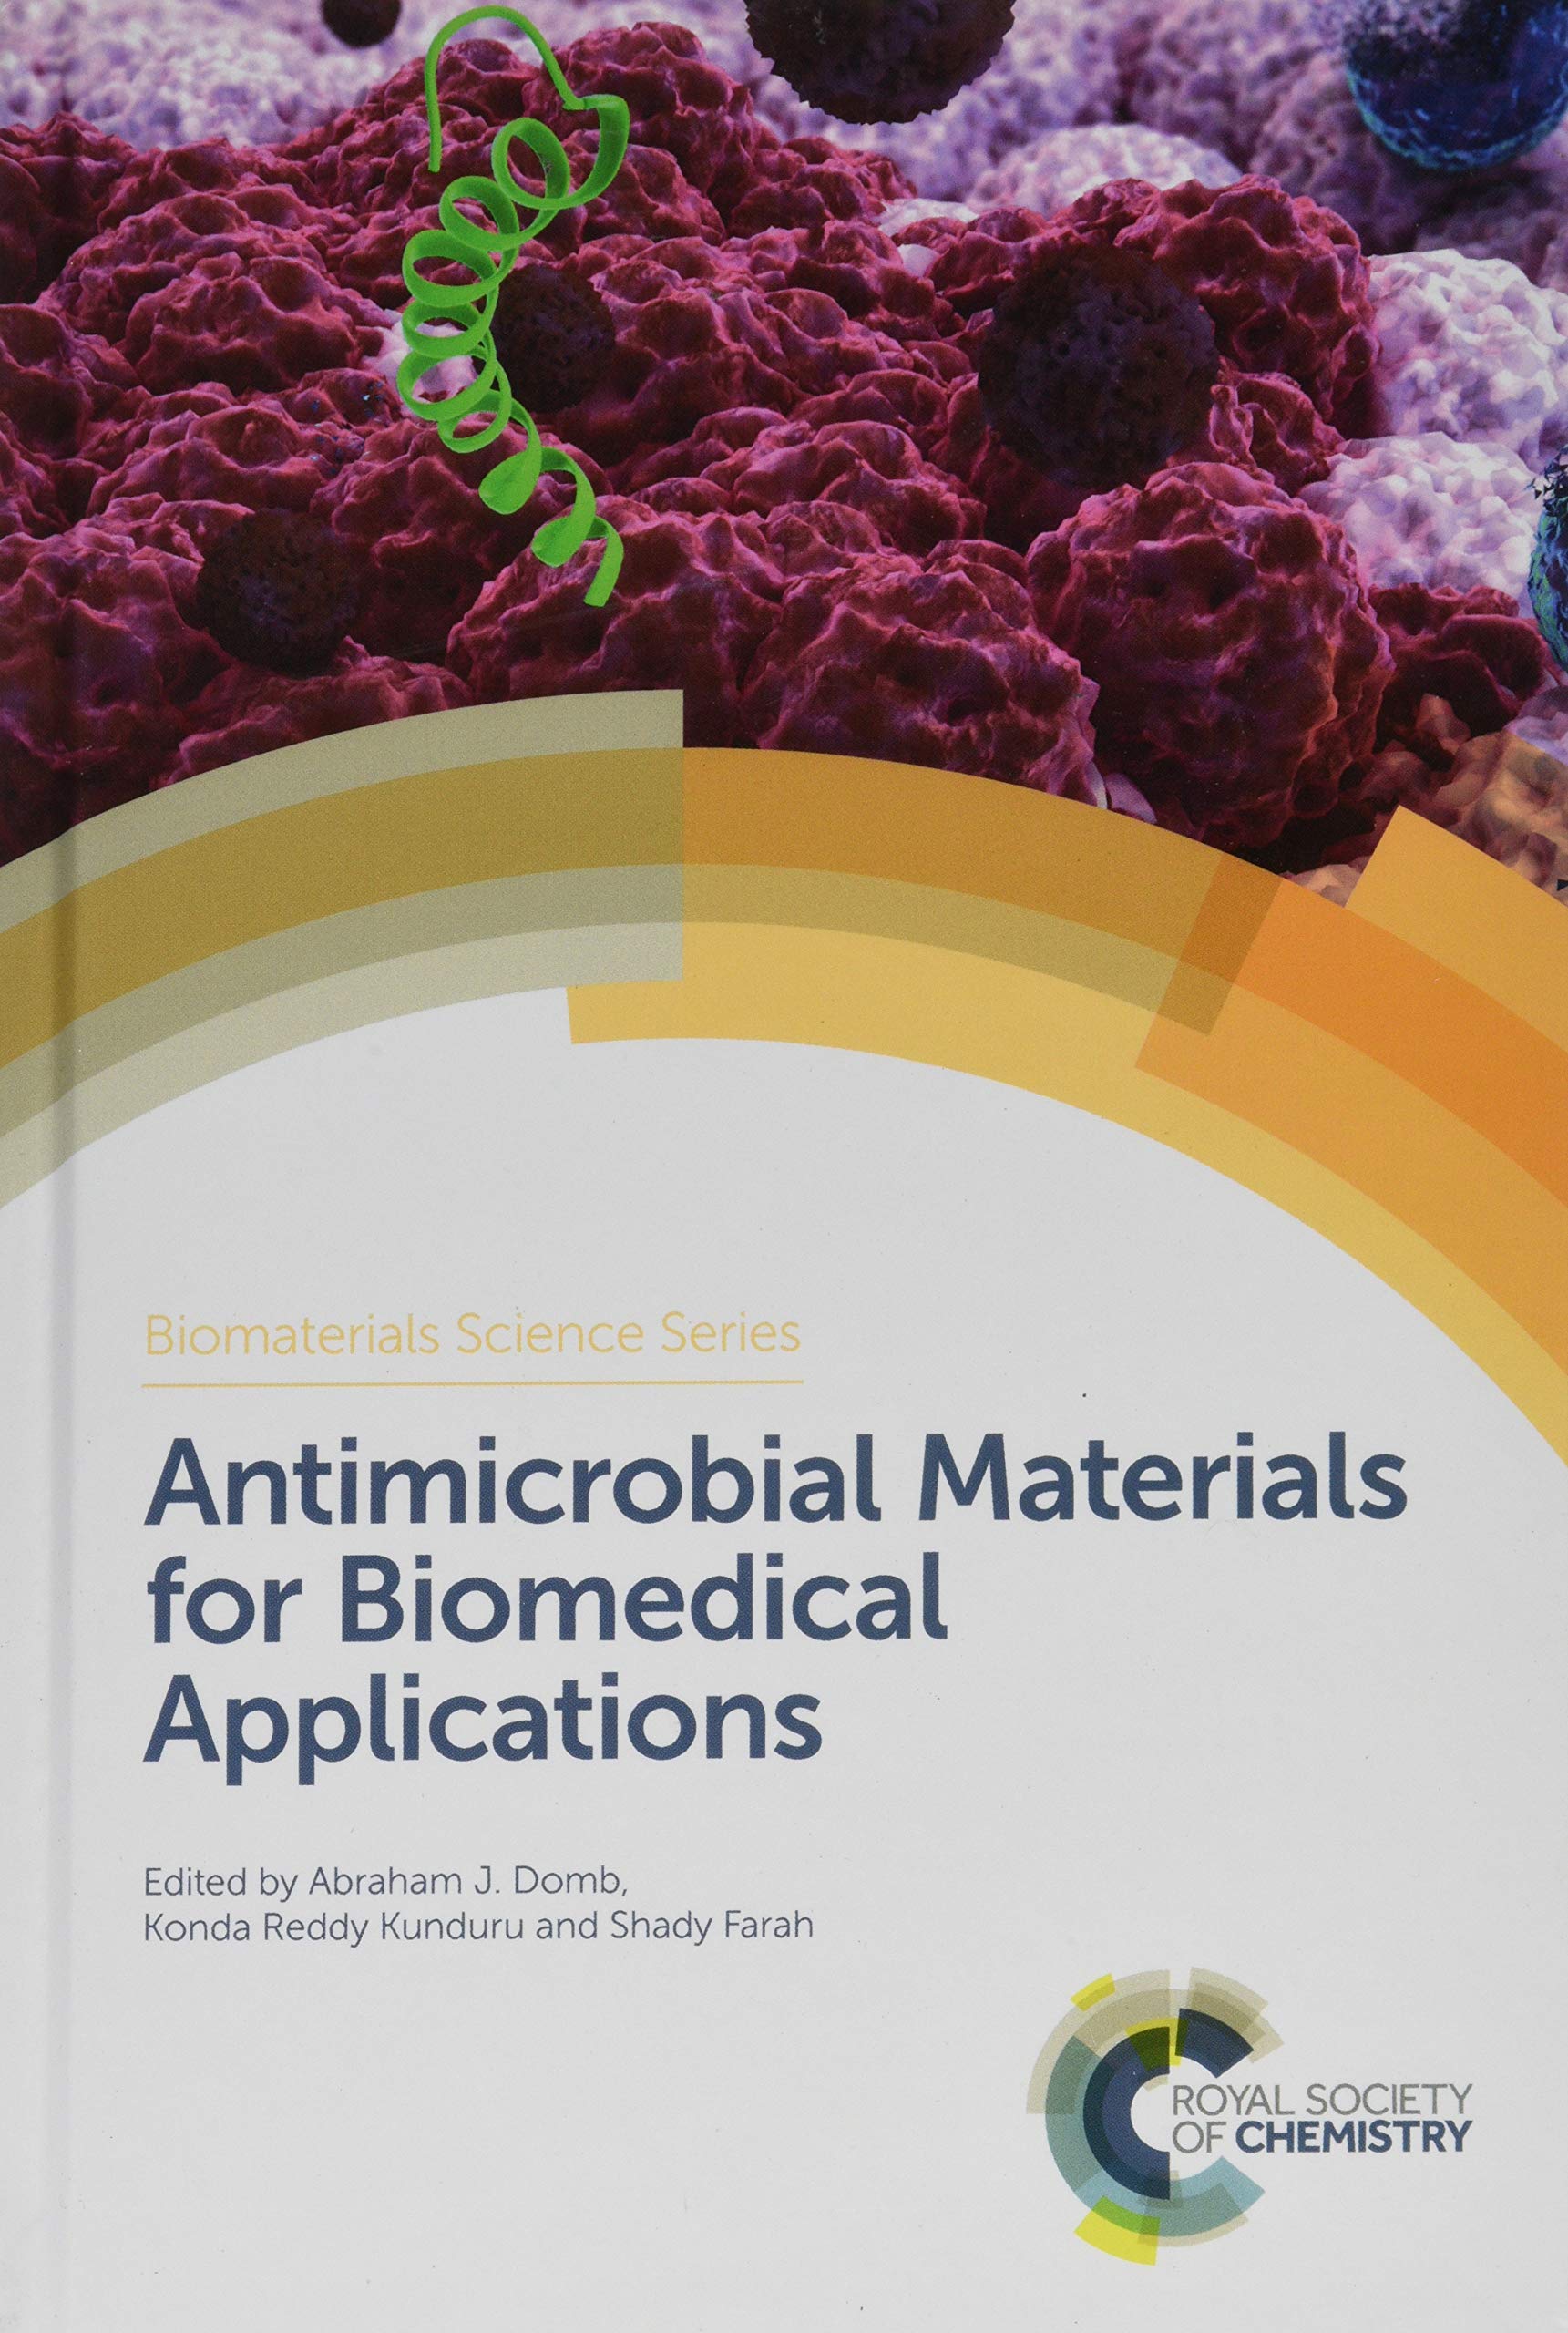 Antimicrobial materials for biomedical applications